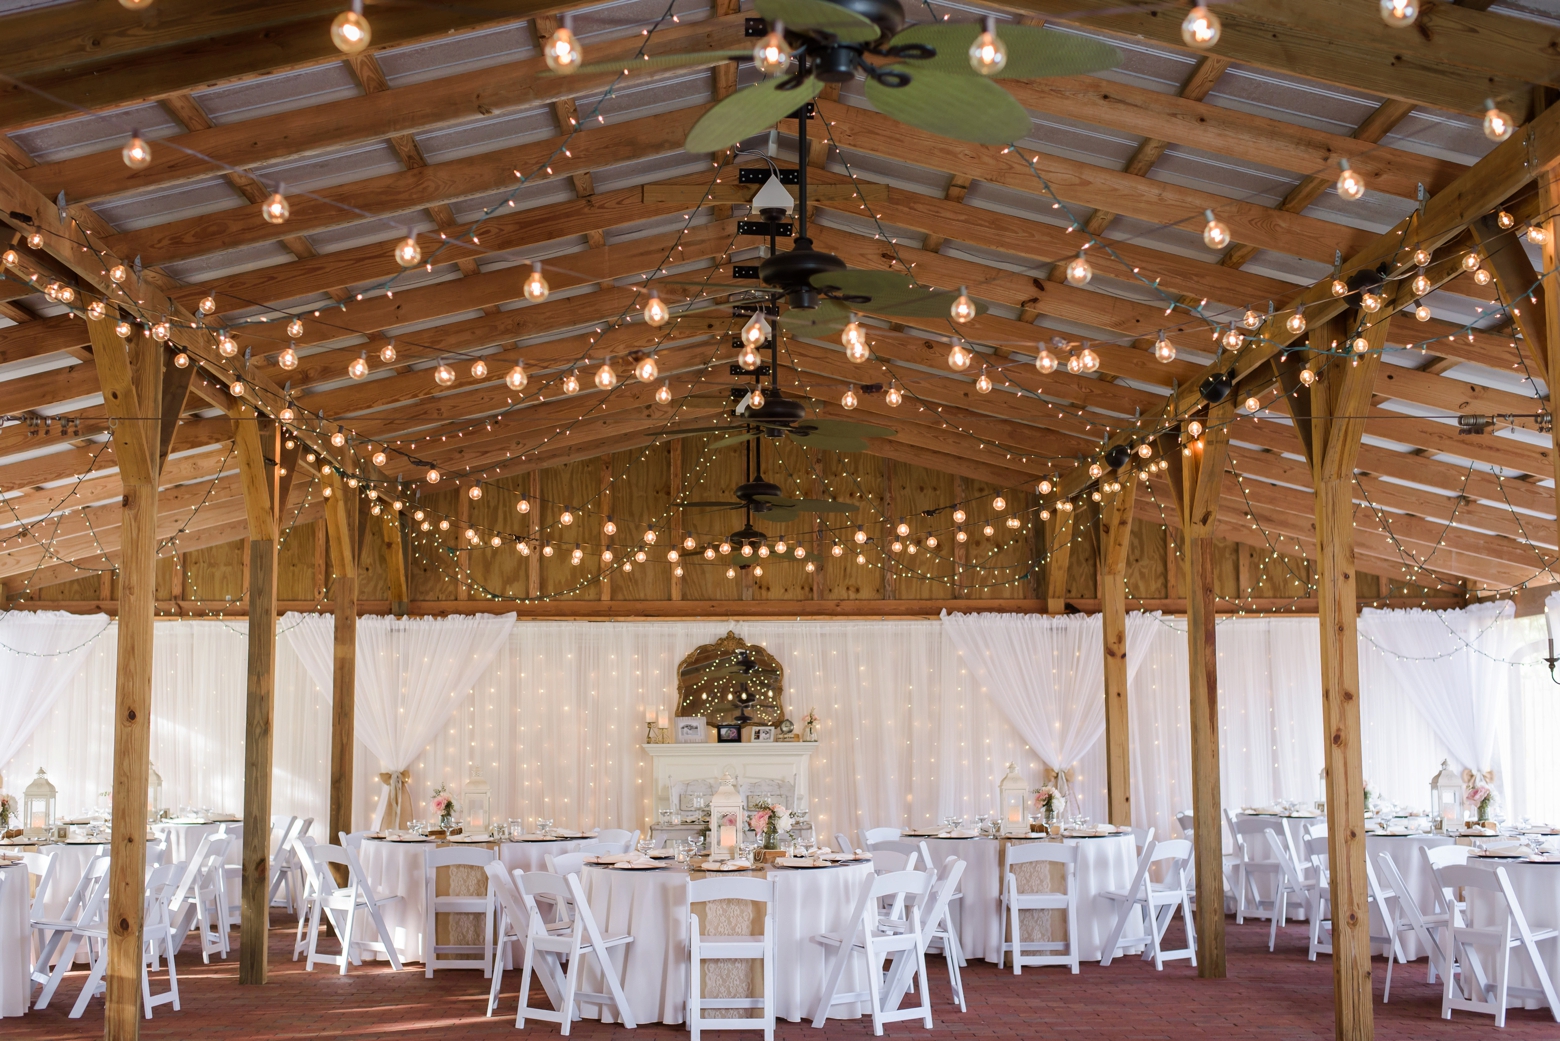 Wedding reception venue decorated in twinkle lights and white tulle